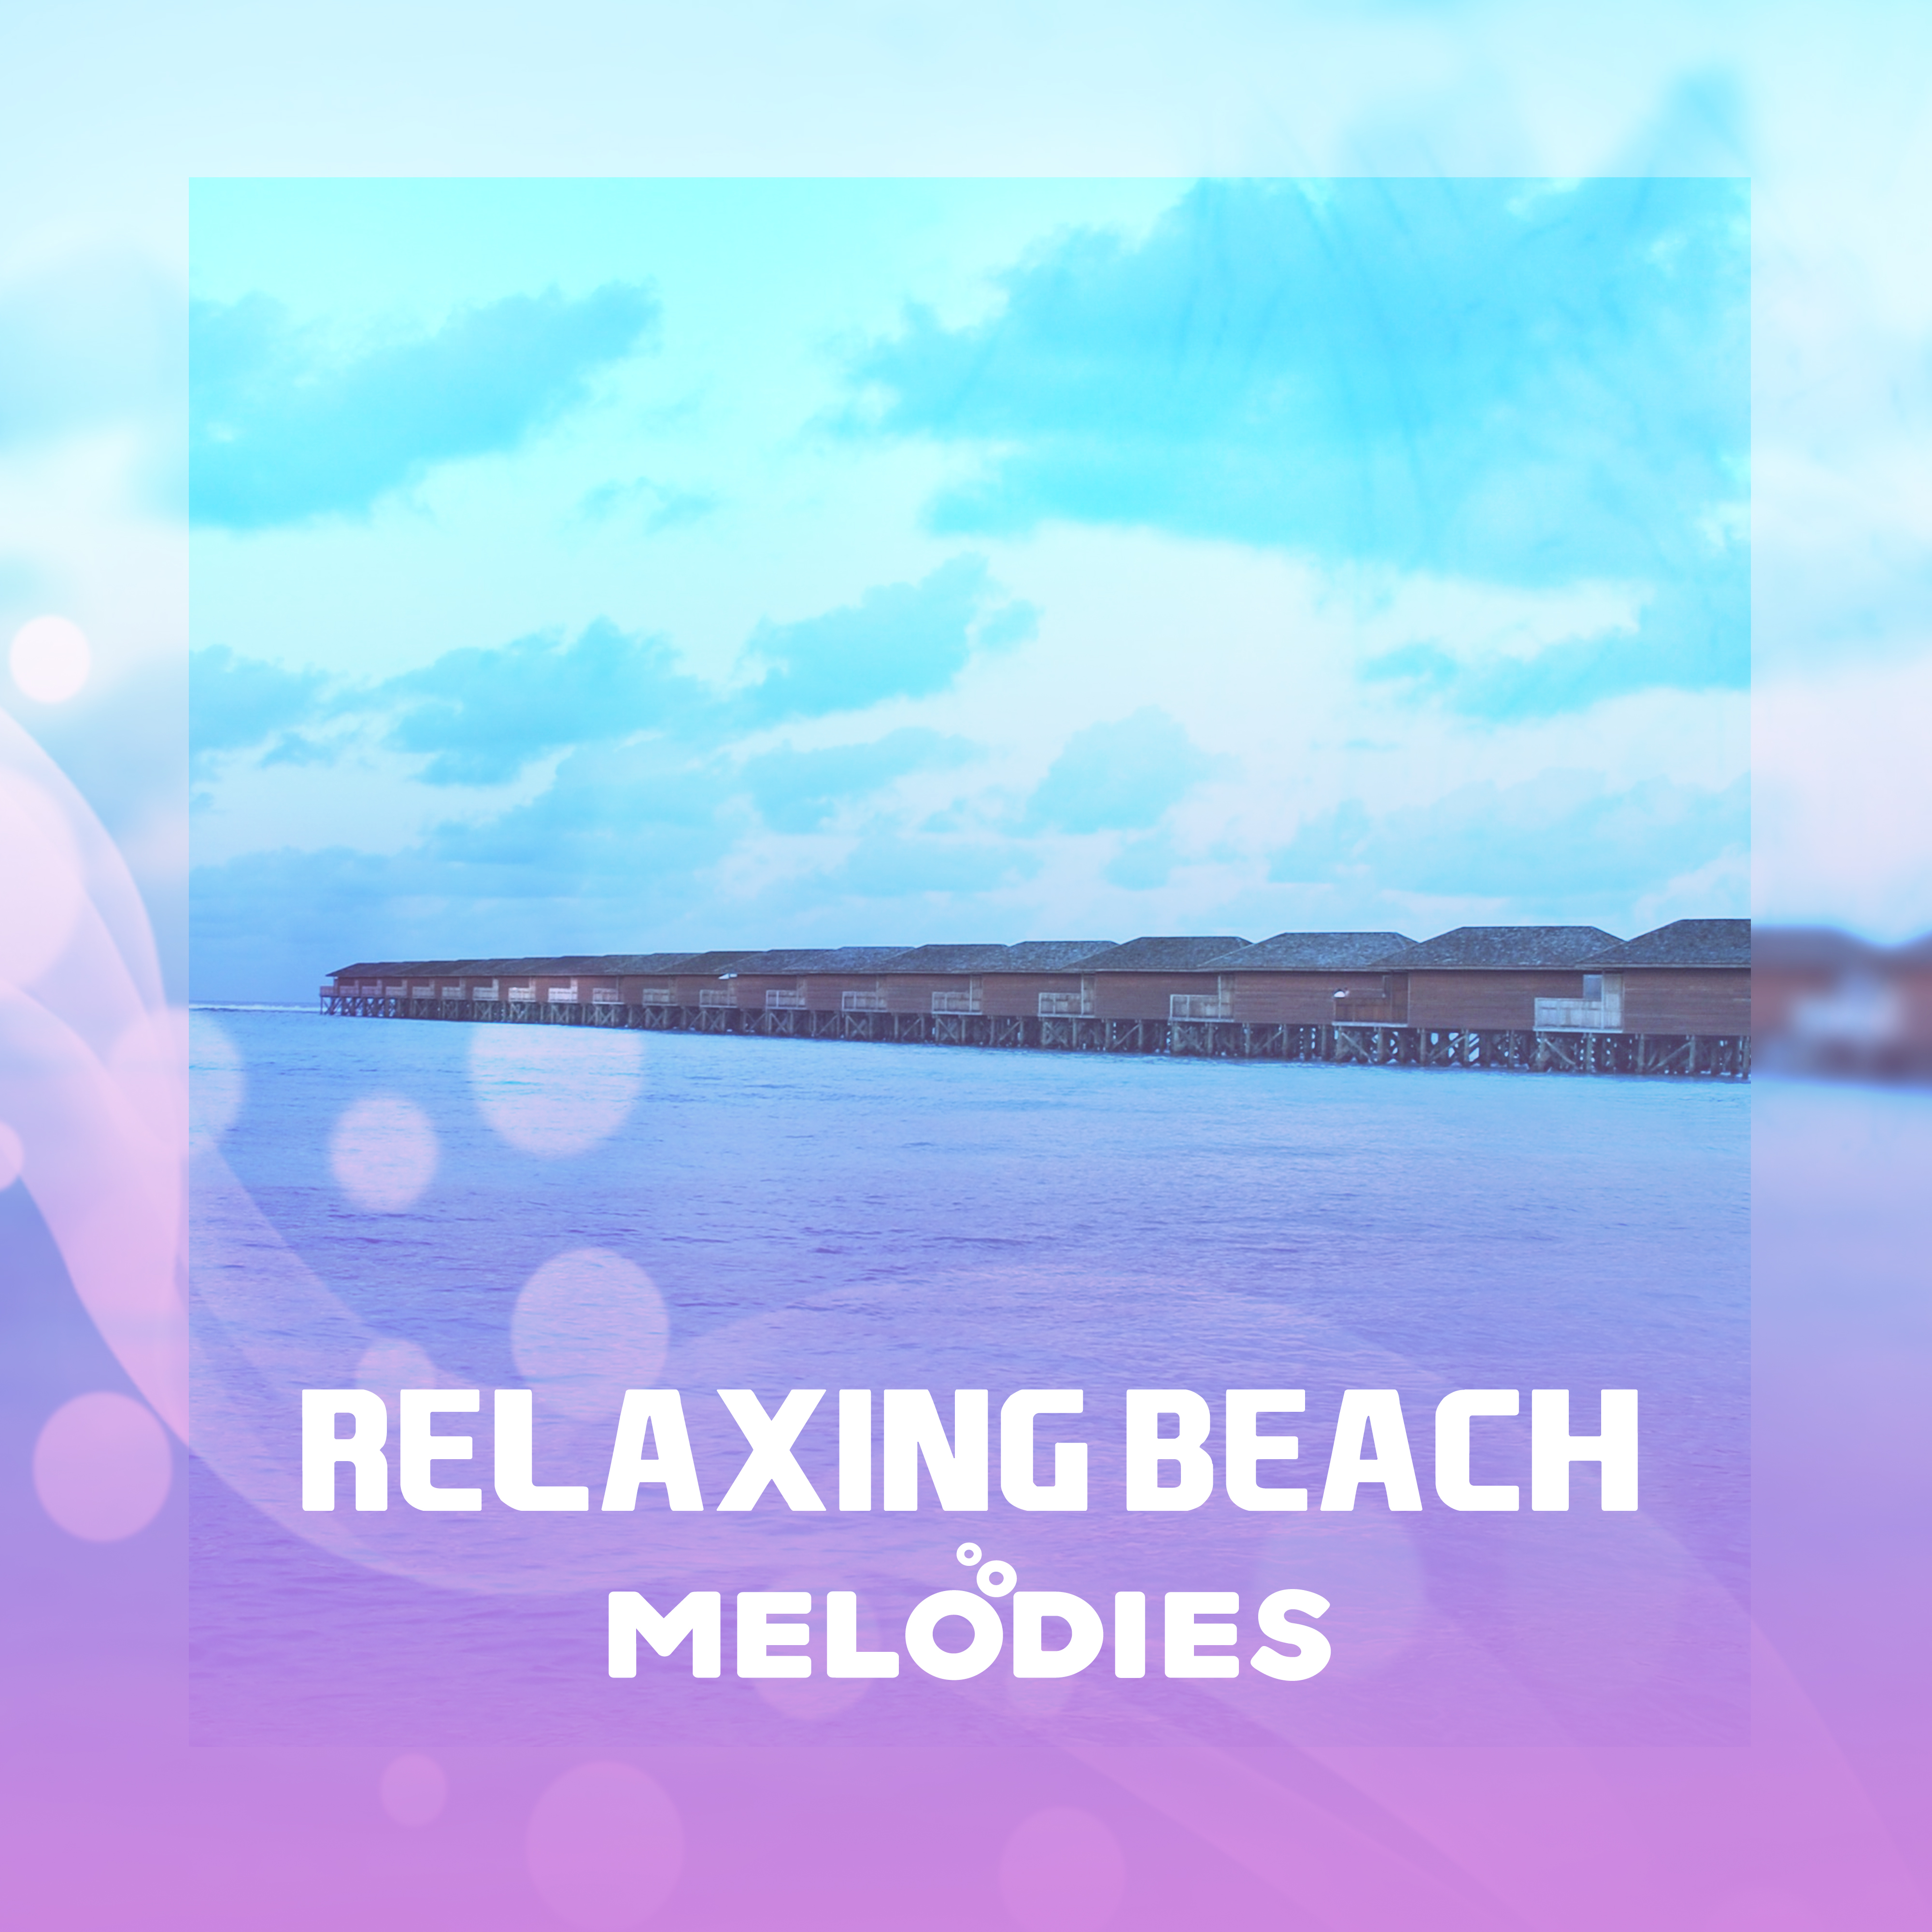 Relaxing Beach Melodies – Summer Chill Out Songs, Rest a Bit, Stress Relief, Peaceful Music